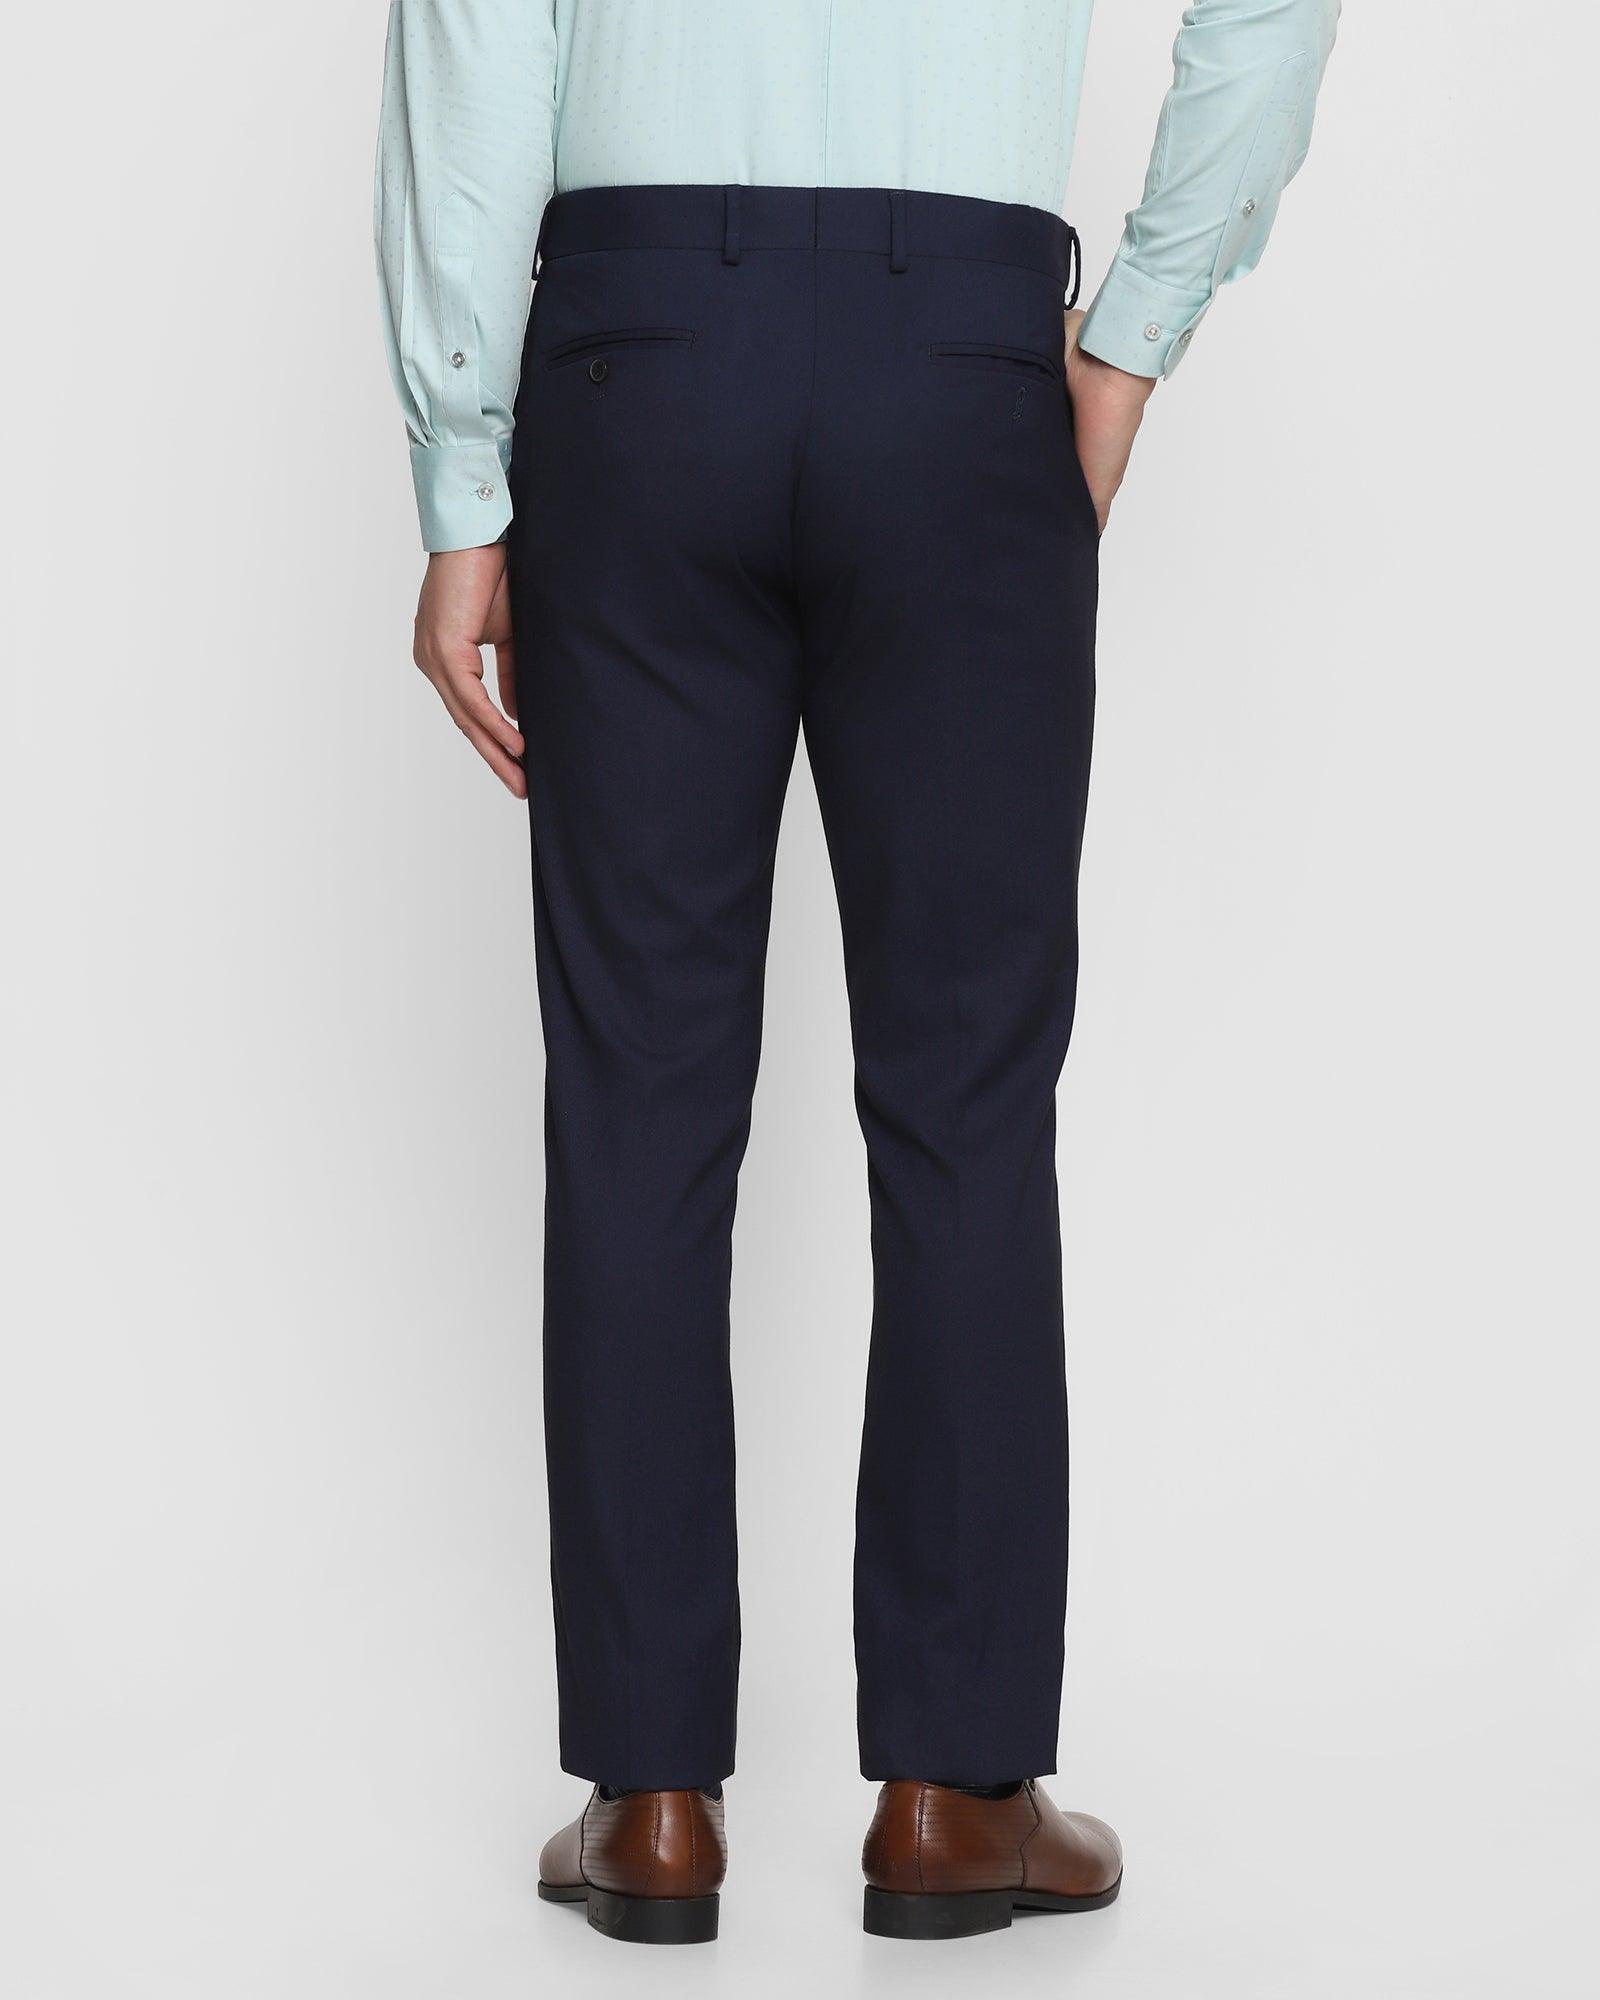 Slim Fit B-91 Formal Navy Textured Trouser - Cairon